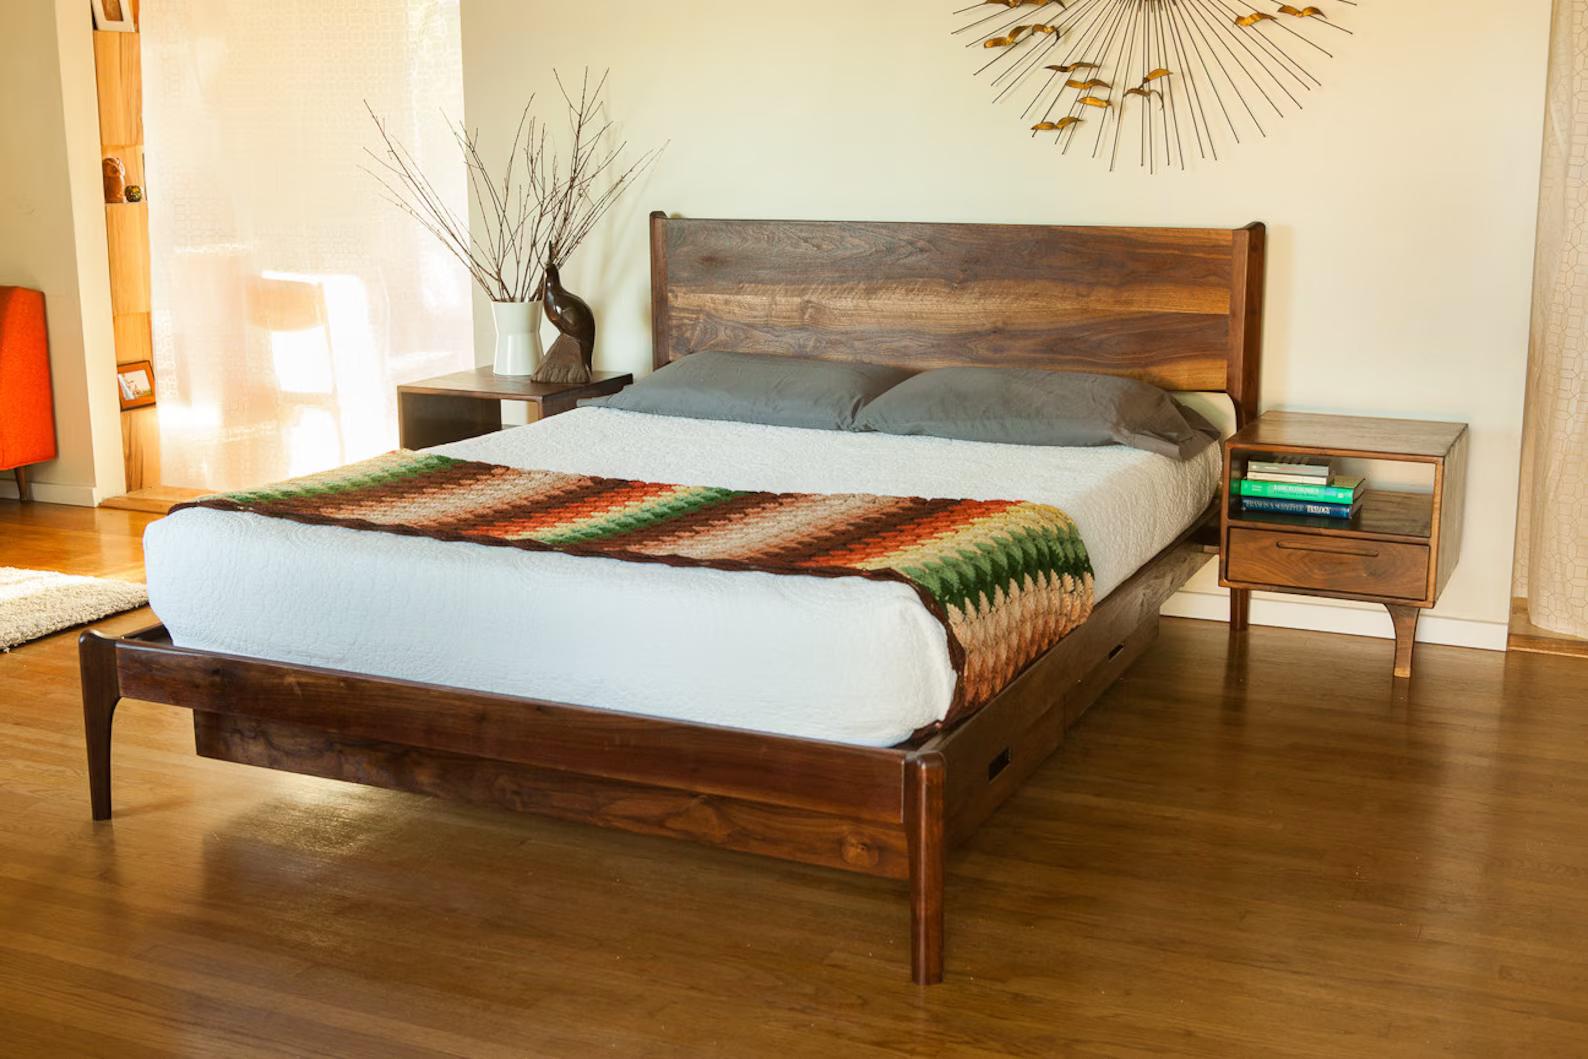 This piece is designed and hand-crafted by yours truly in Long Beach. The bed pictured is built from walnut, but I can use other woods upon request. The design is my own, inspired by the Scandinavian furniture of the 50's (Danish/Mid Century